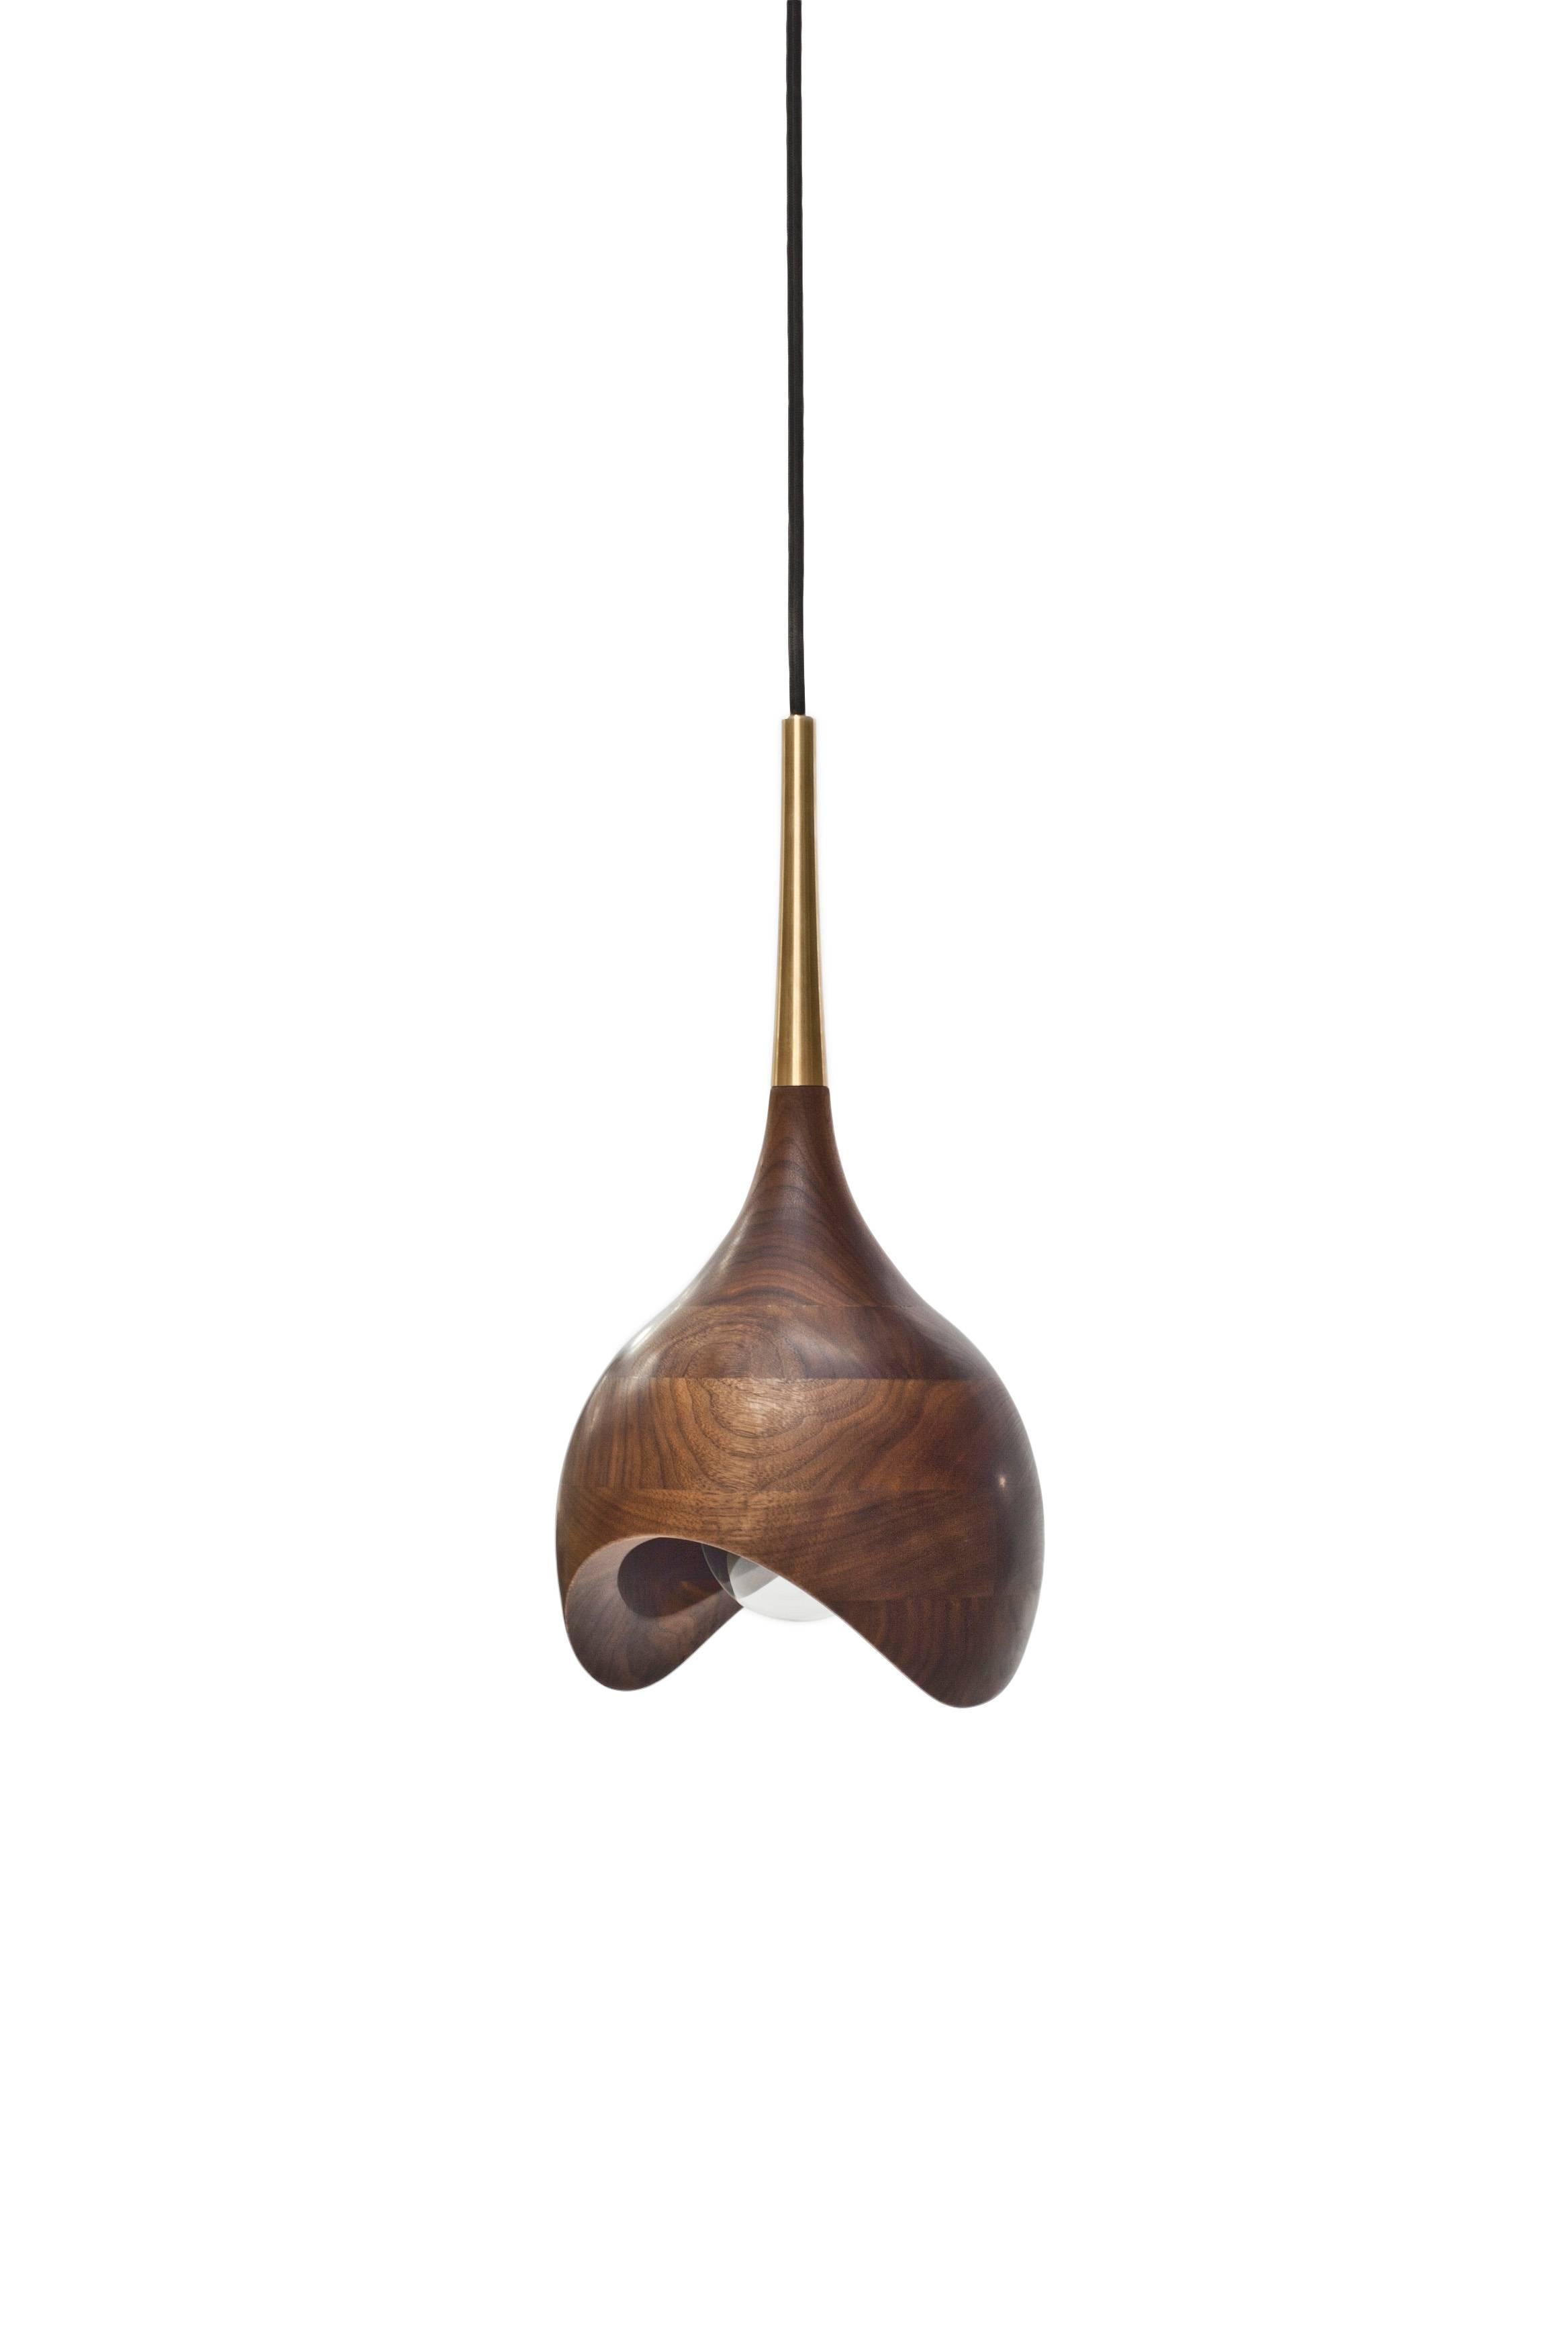 Words from the designer: Dråpe (Norwegian for drop) is based on the shape of a water drop. The open end means the design completely changes when viewed from different angles. I just love the organic look. Also, the brass top (which I had some great